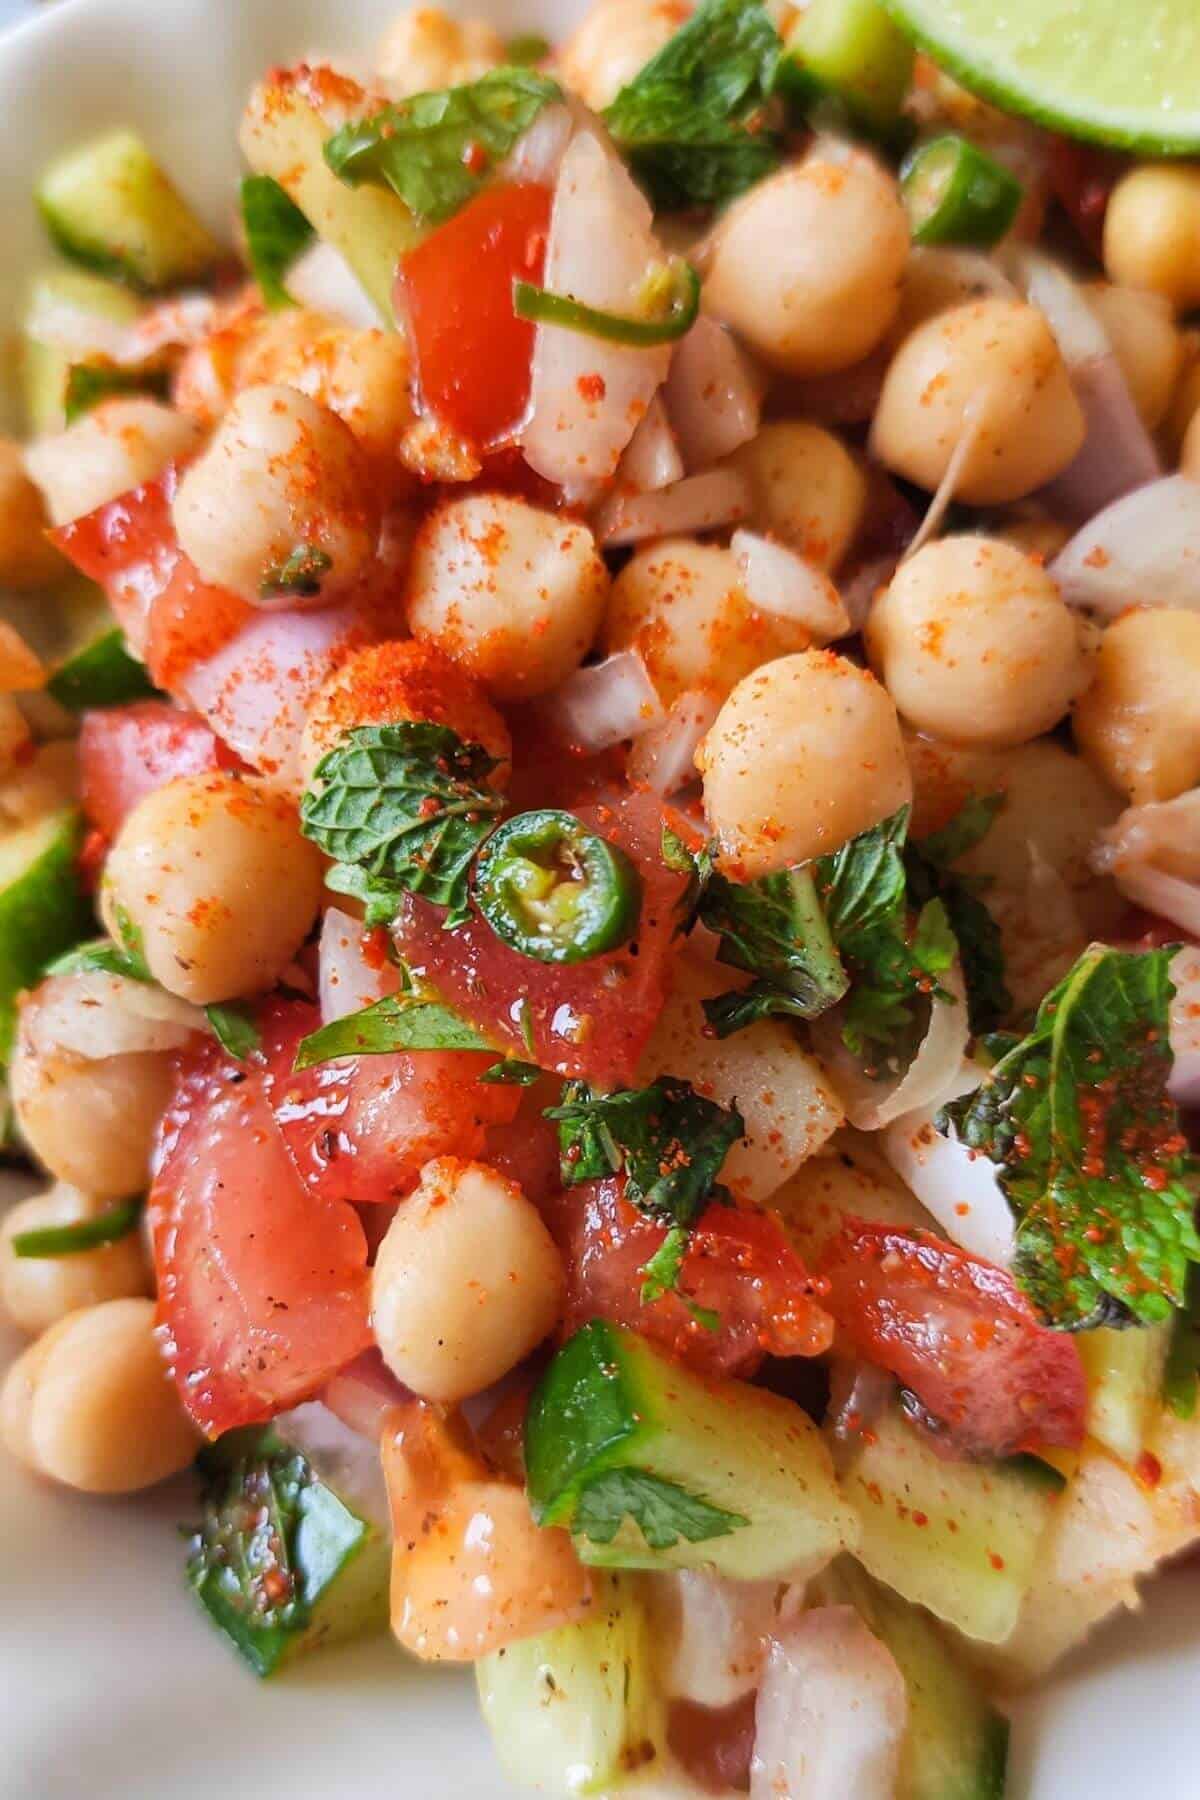 Simple Indian style chickpea salad served on a white plate